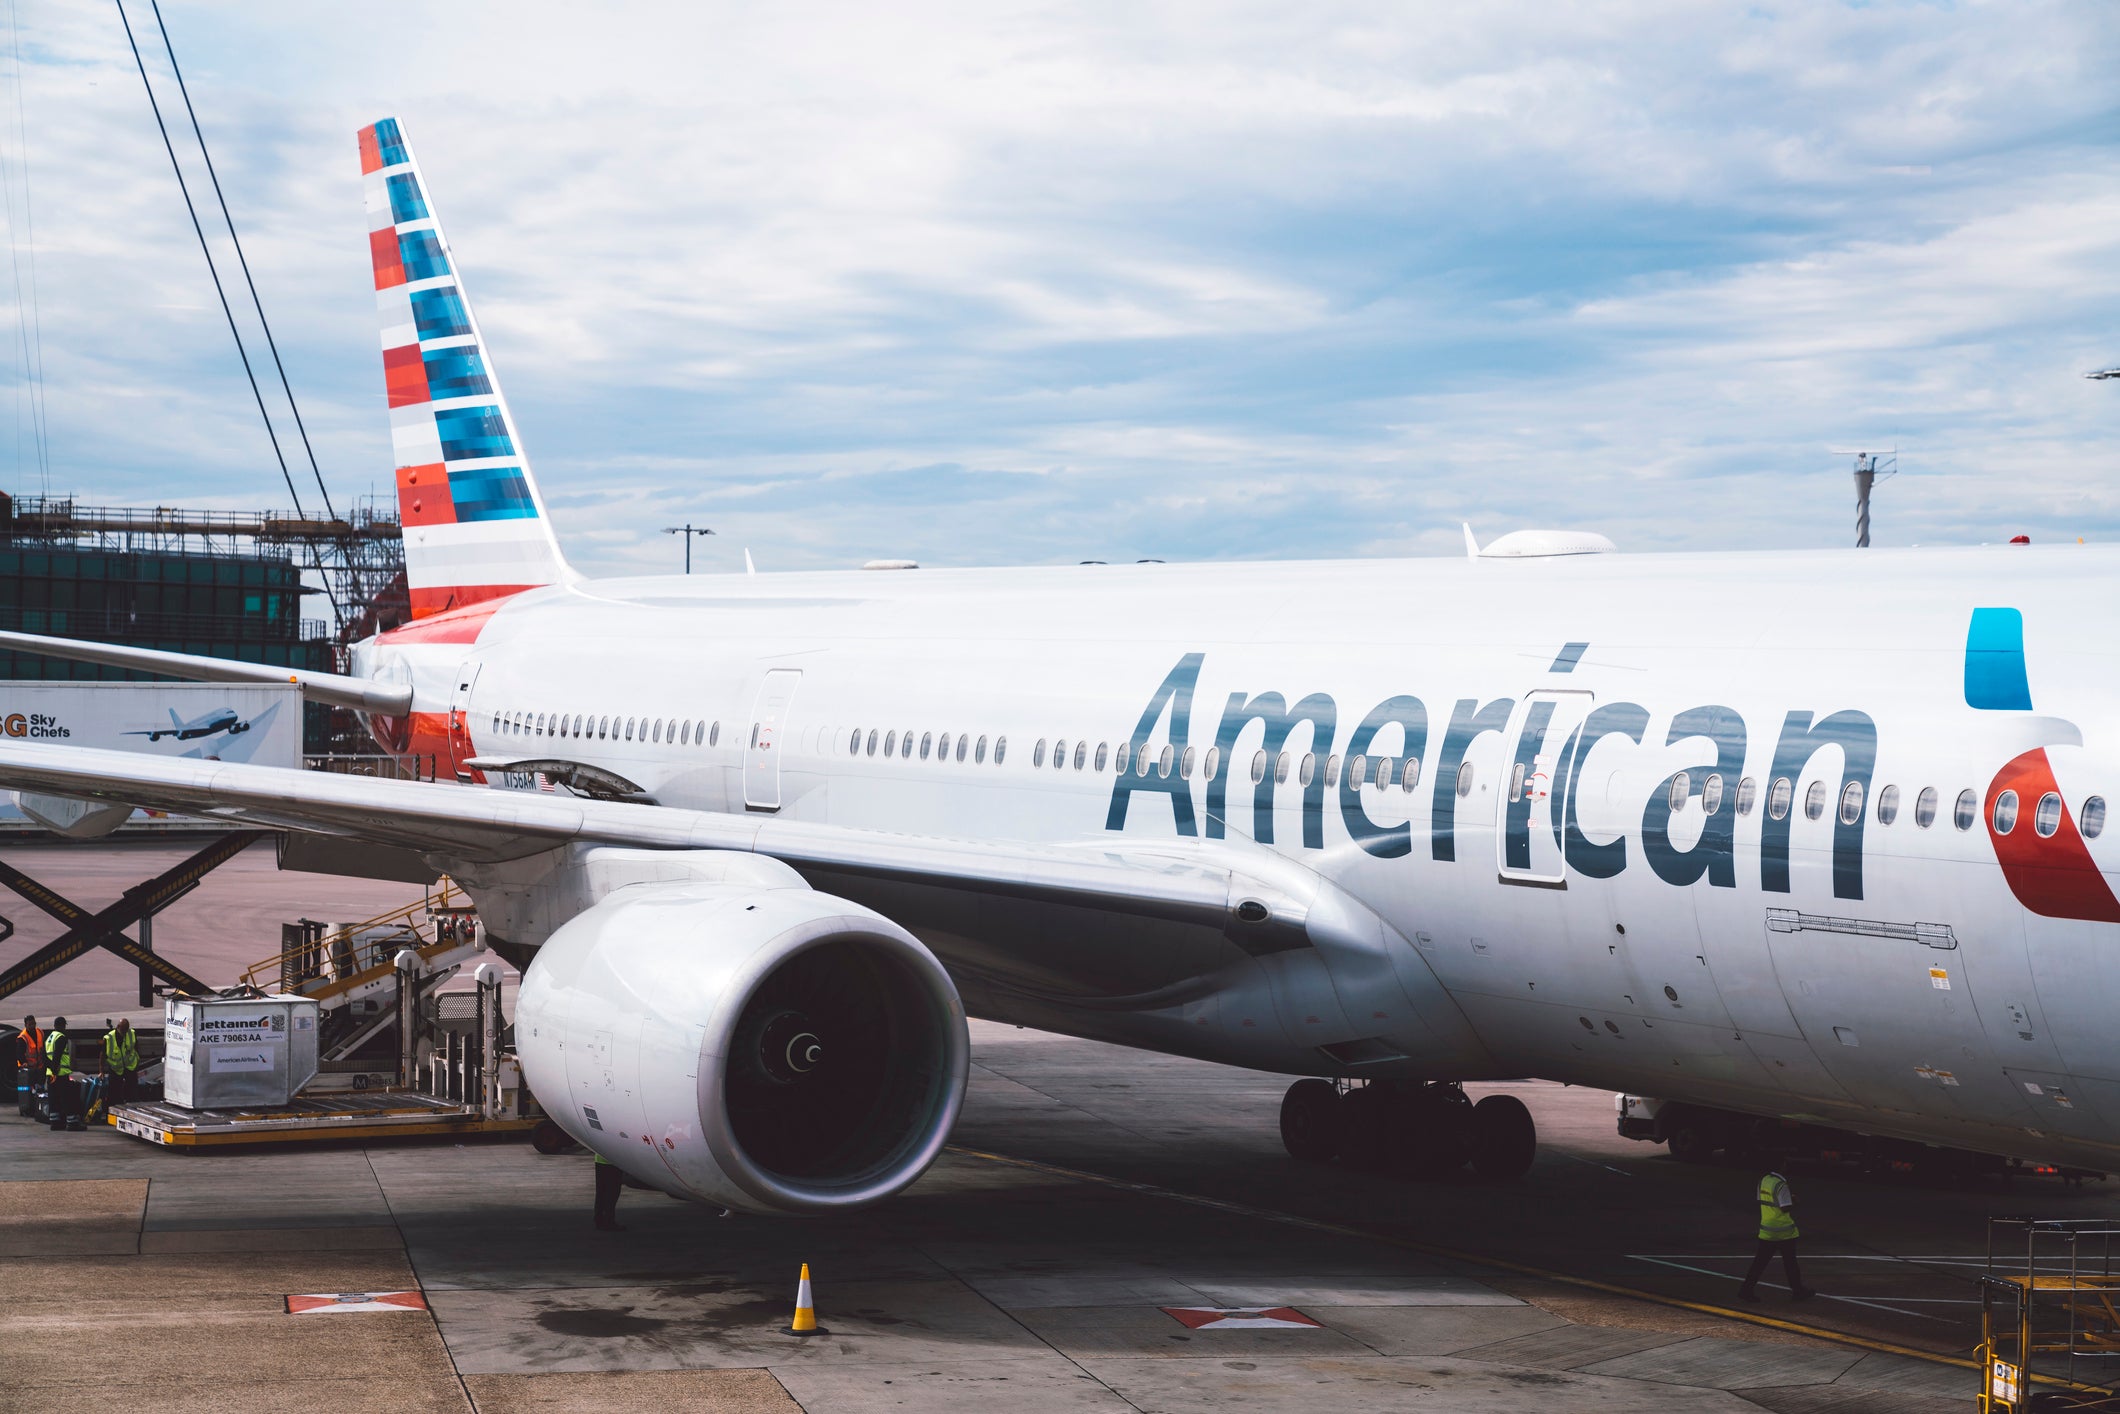 The American Airlines flight was destined for Chicago O’Hare International Airport